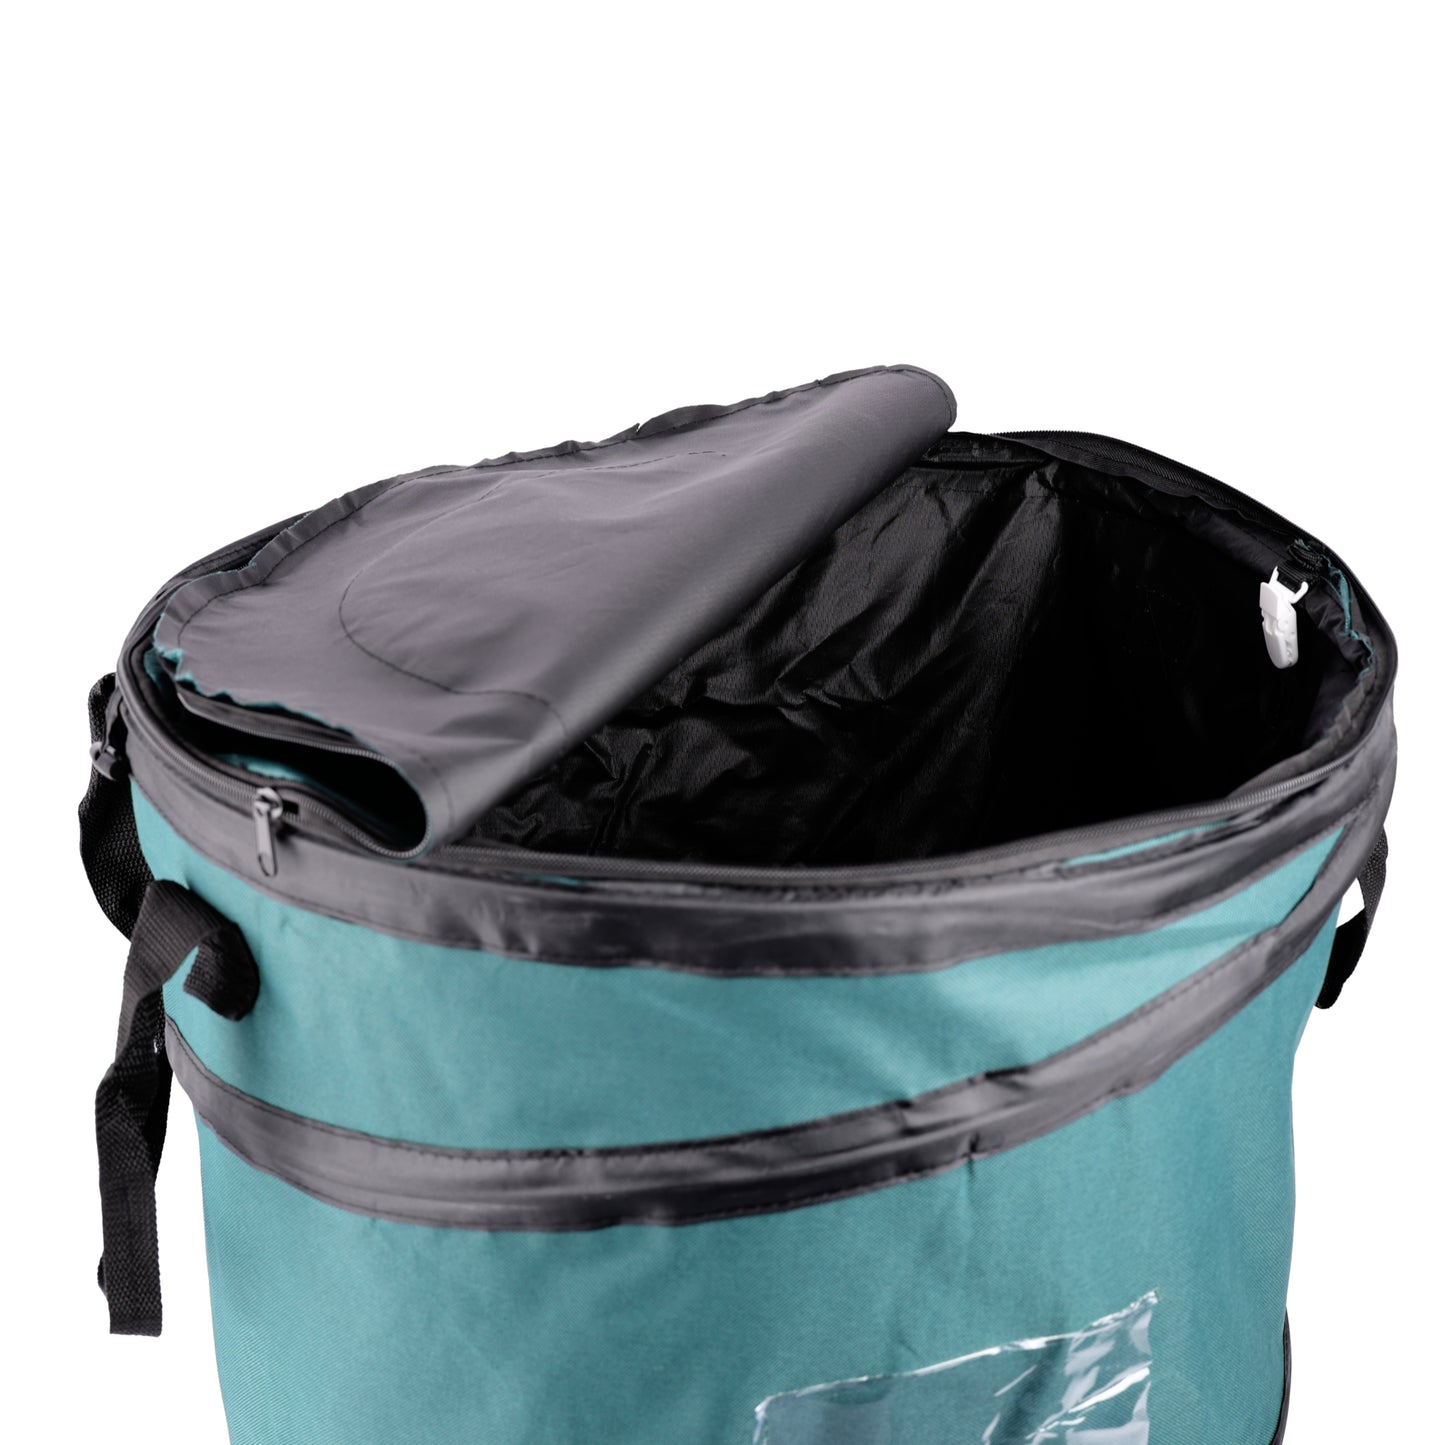 Deluxe Pop-Up Trash Can